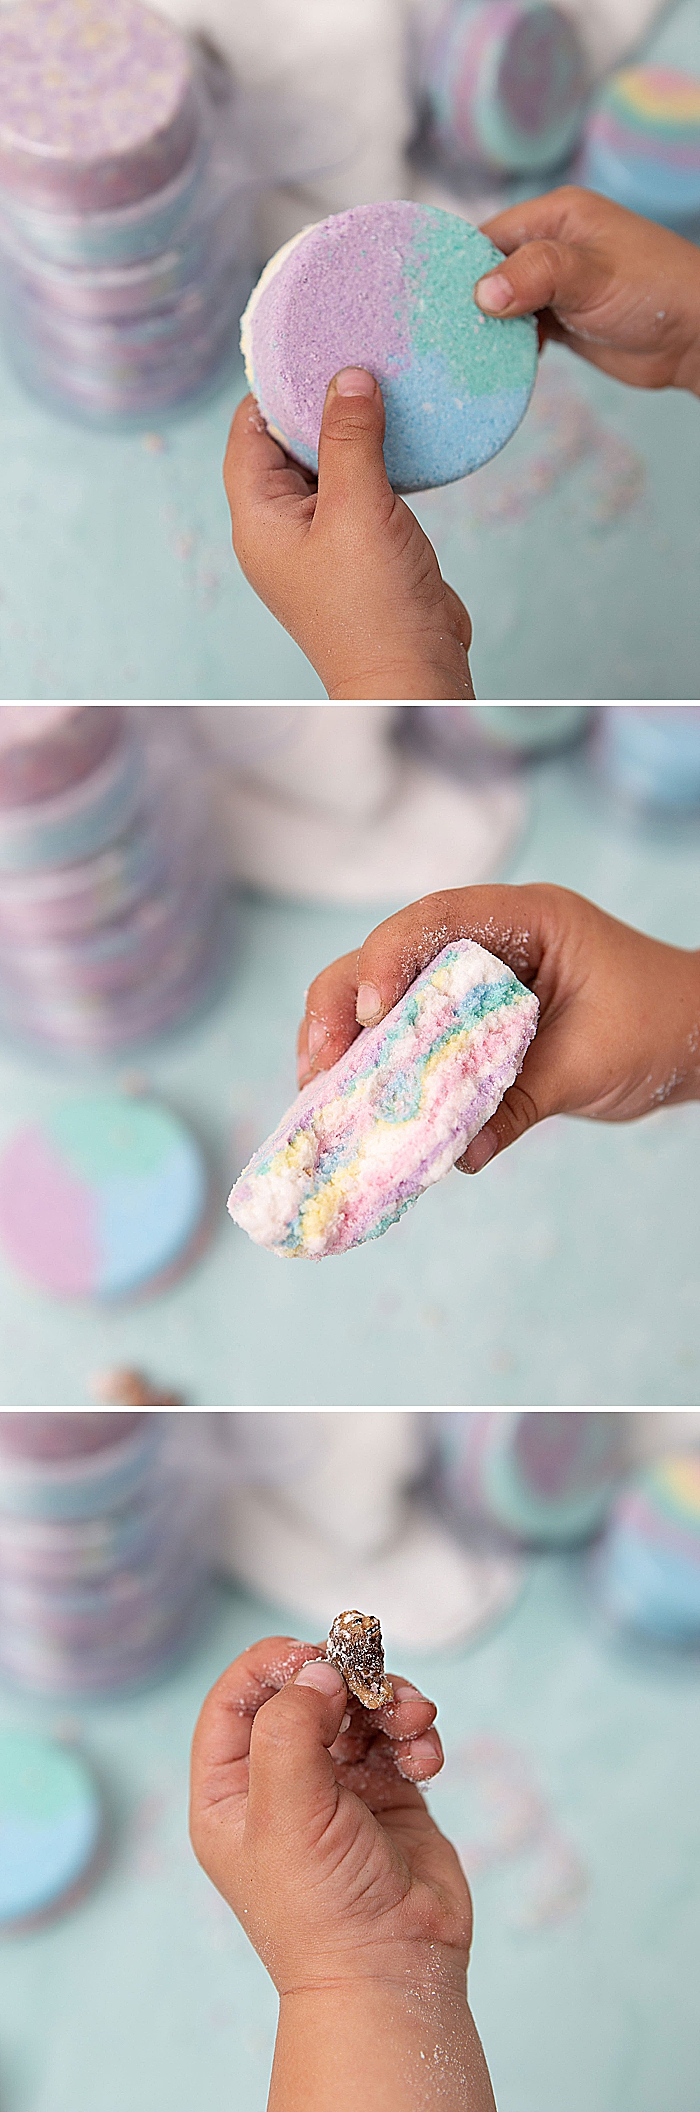 How to make your own kids toy surprise bath bombs!